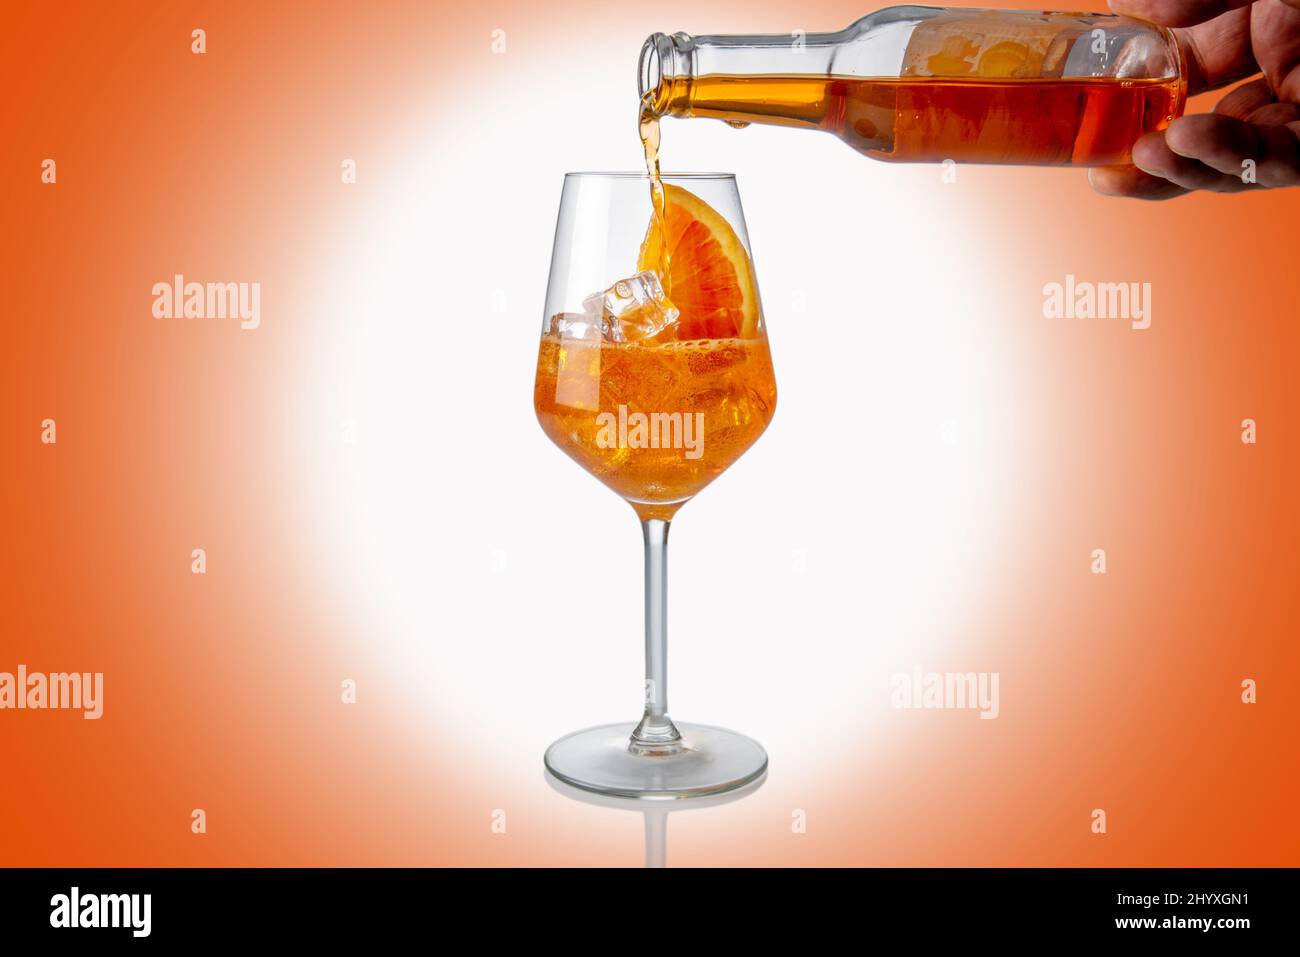 Alcoholic Aperol Spritz Cocktail poured from glass bottle into glass with ice cube and orange slice, spot white light on orange background Stock Photo